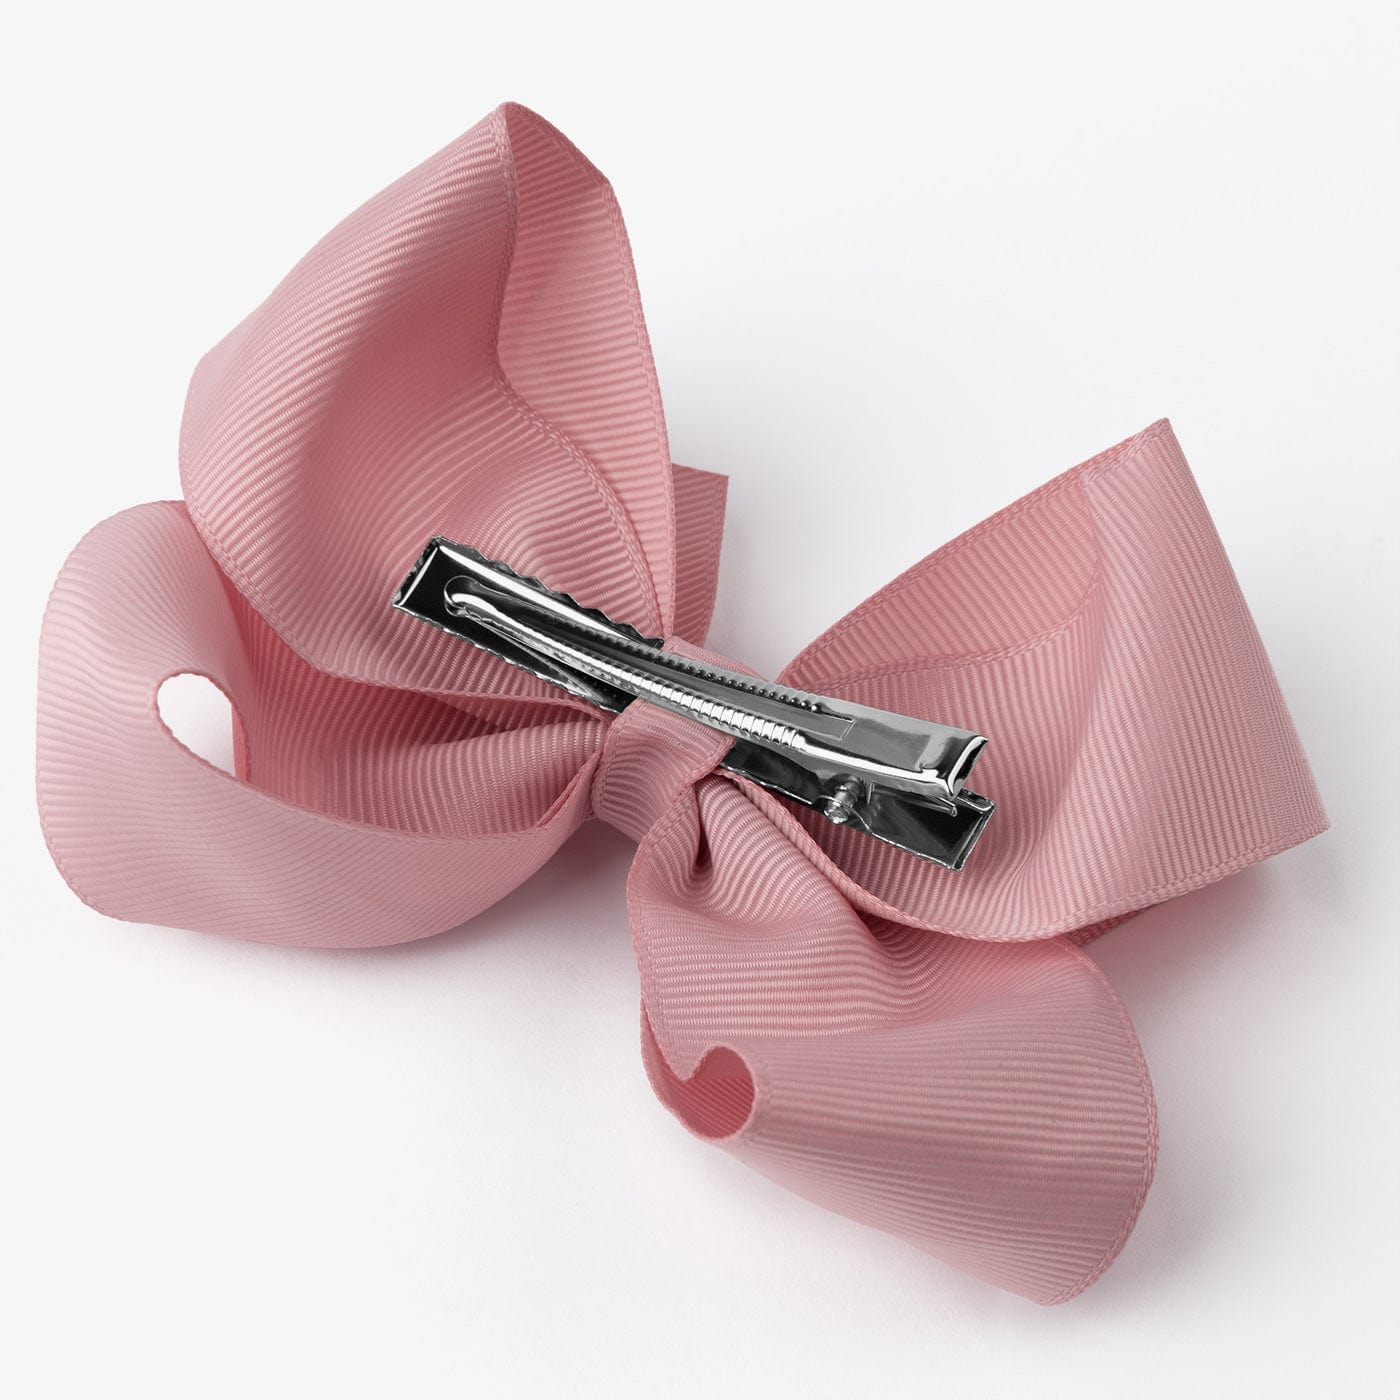 CONGUITOS TEXTIL Accessories Girls Pink Hair Bow